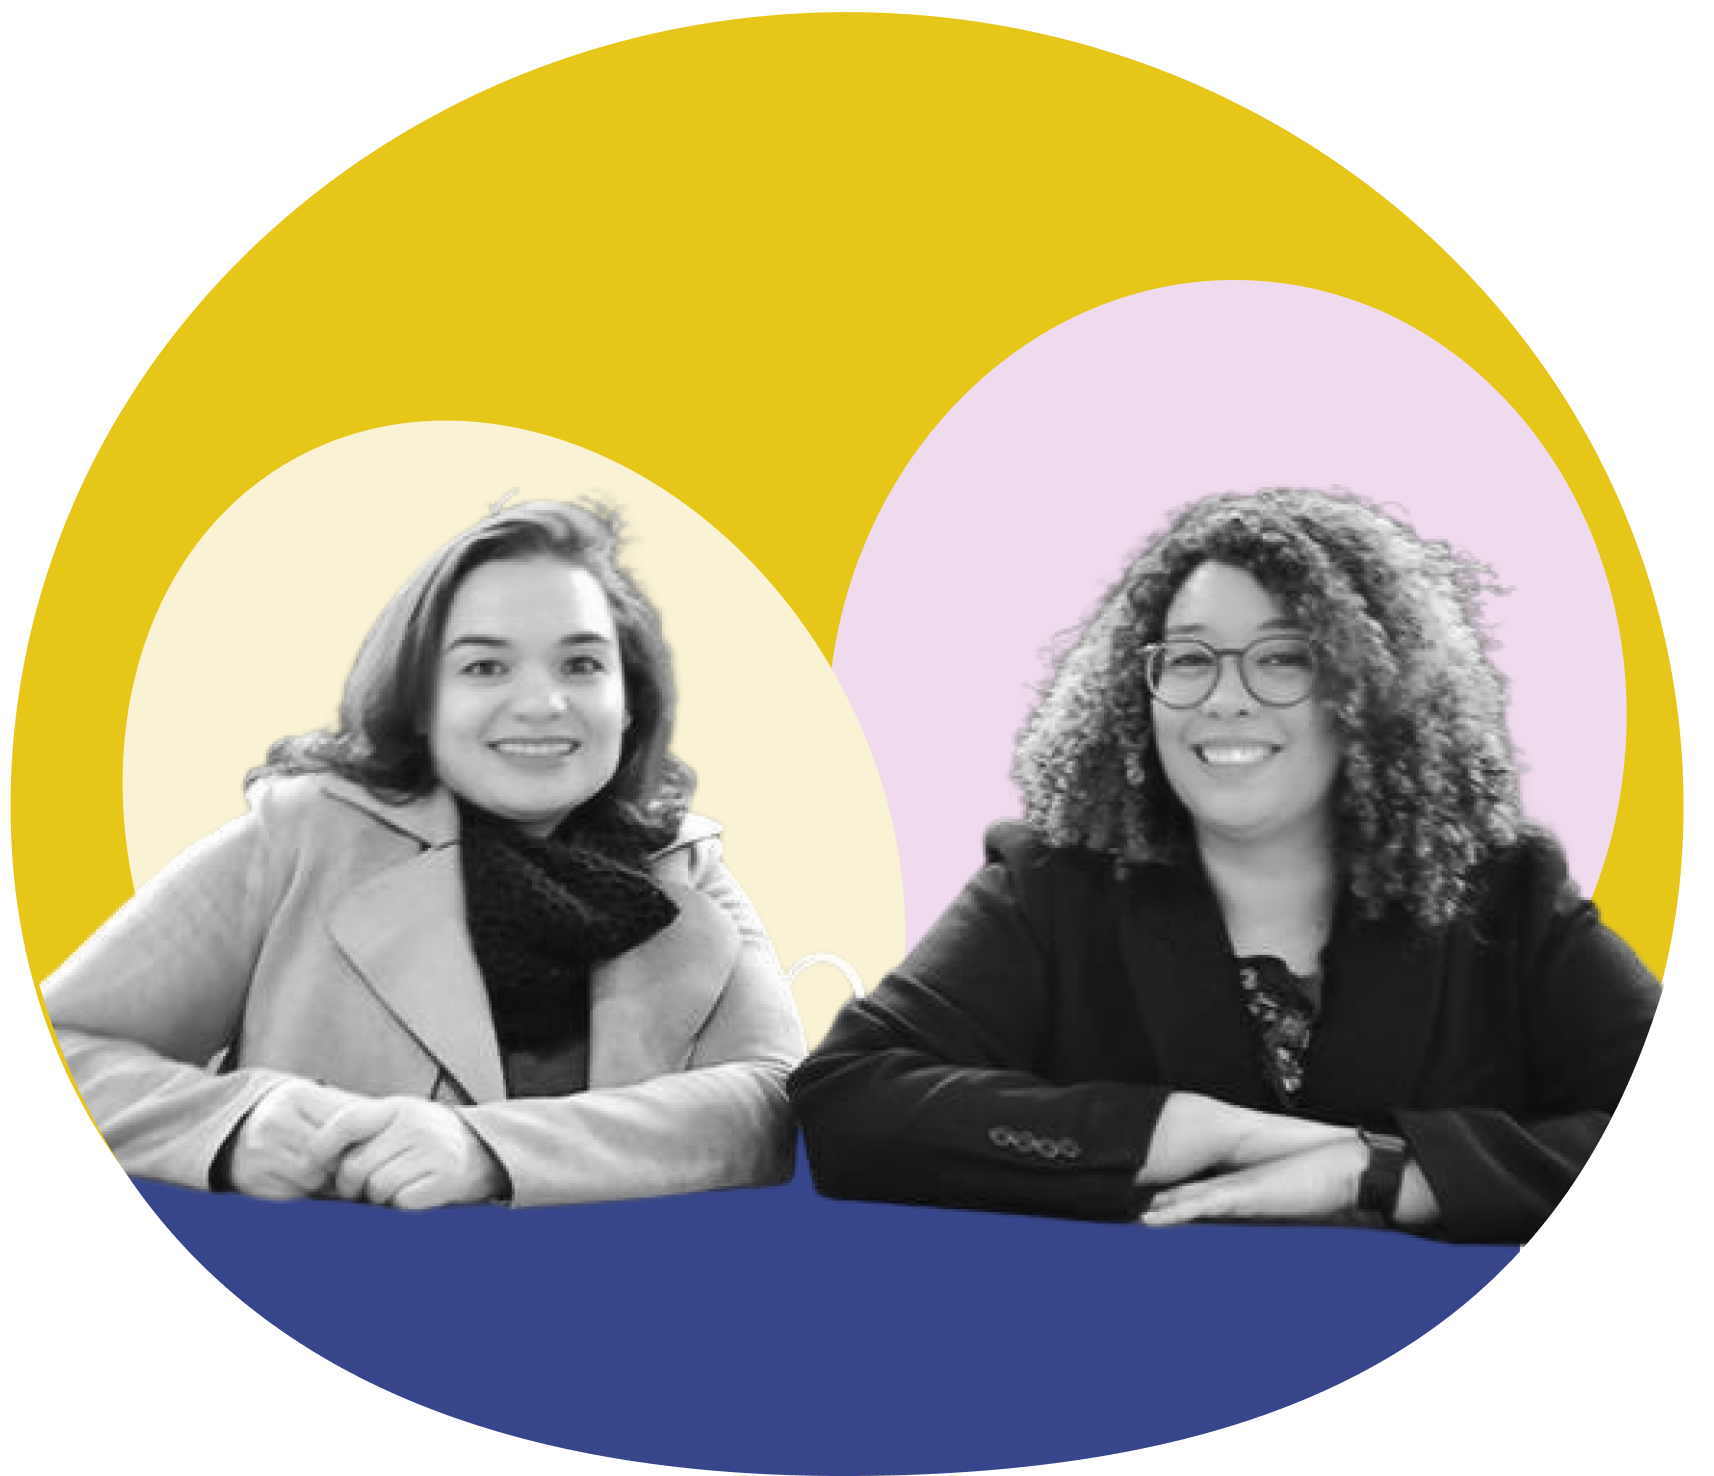 Founders Denise and Juliana shown in a black and white image. Behind them are colourful graphic blocks.